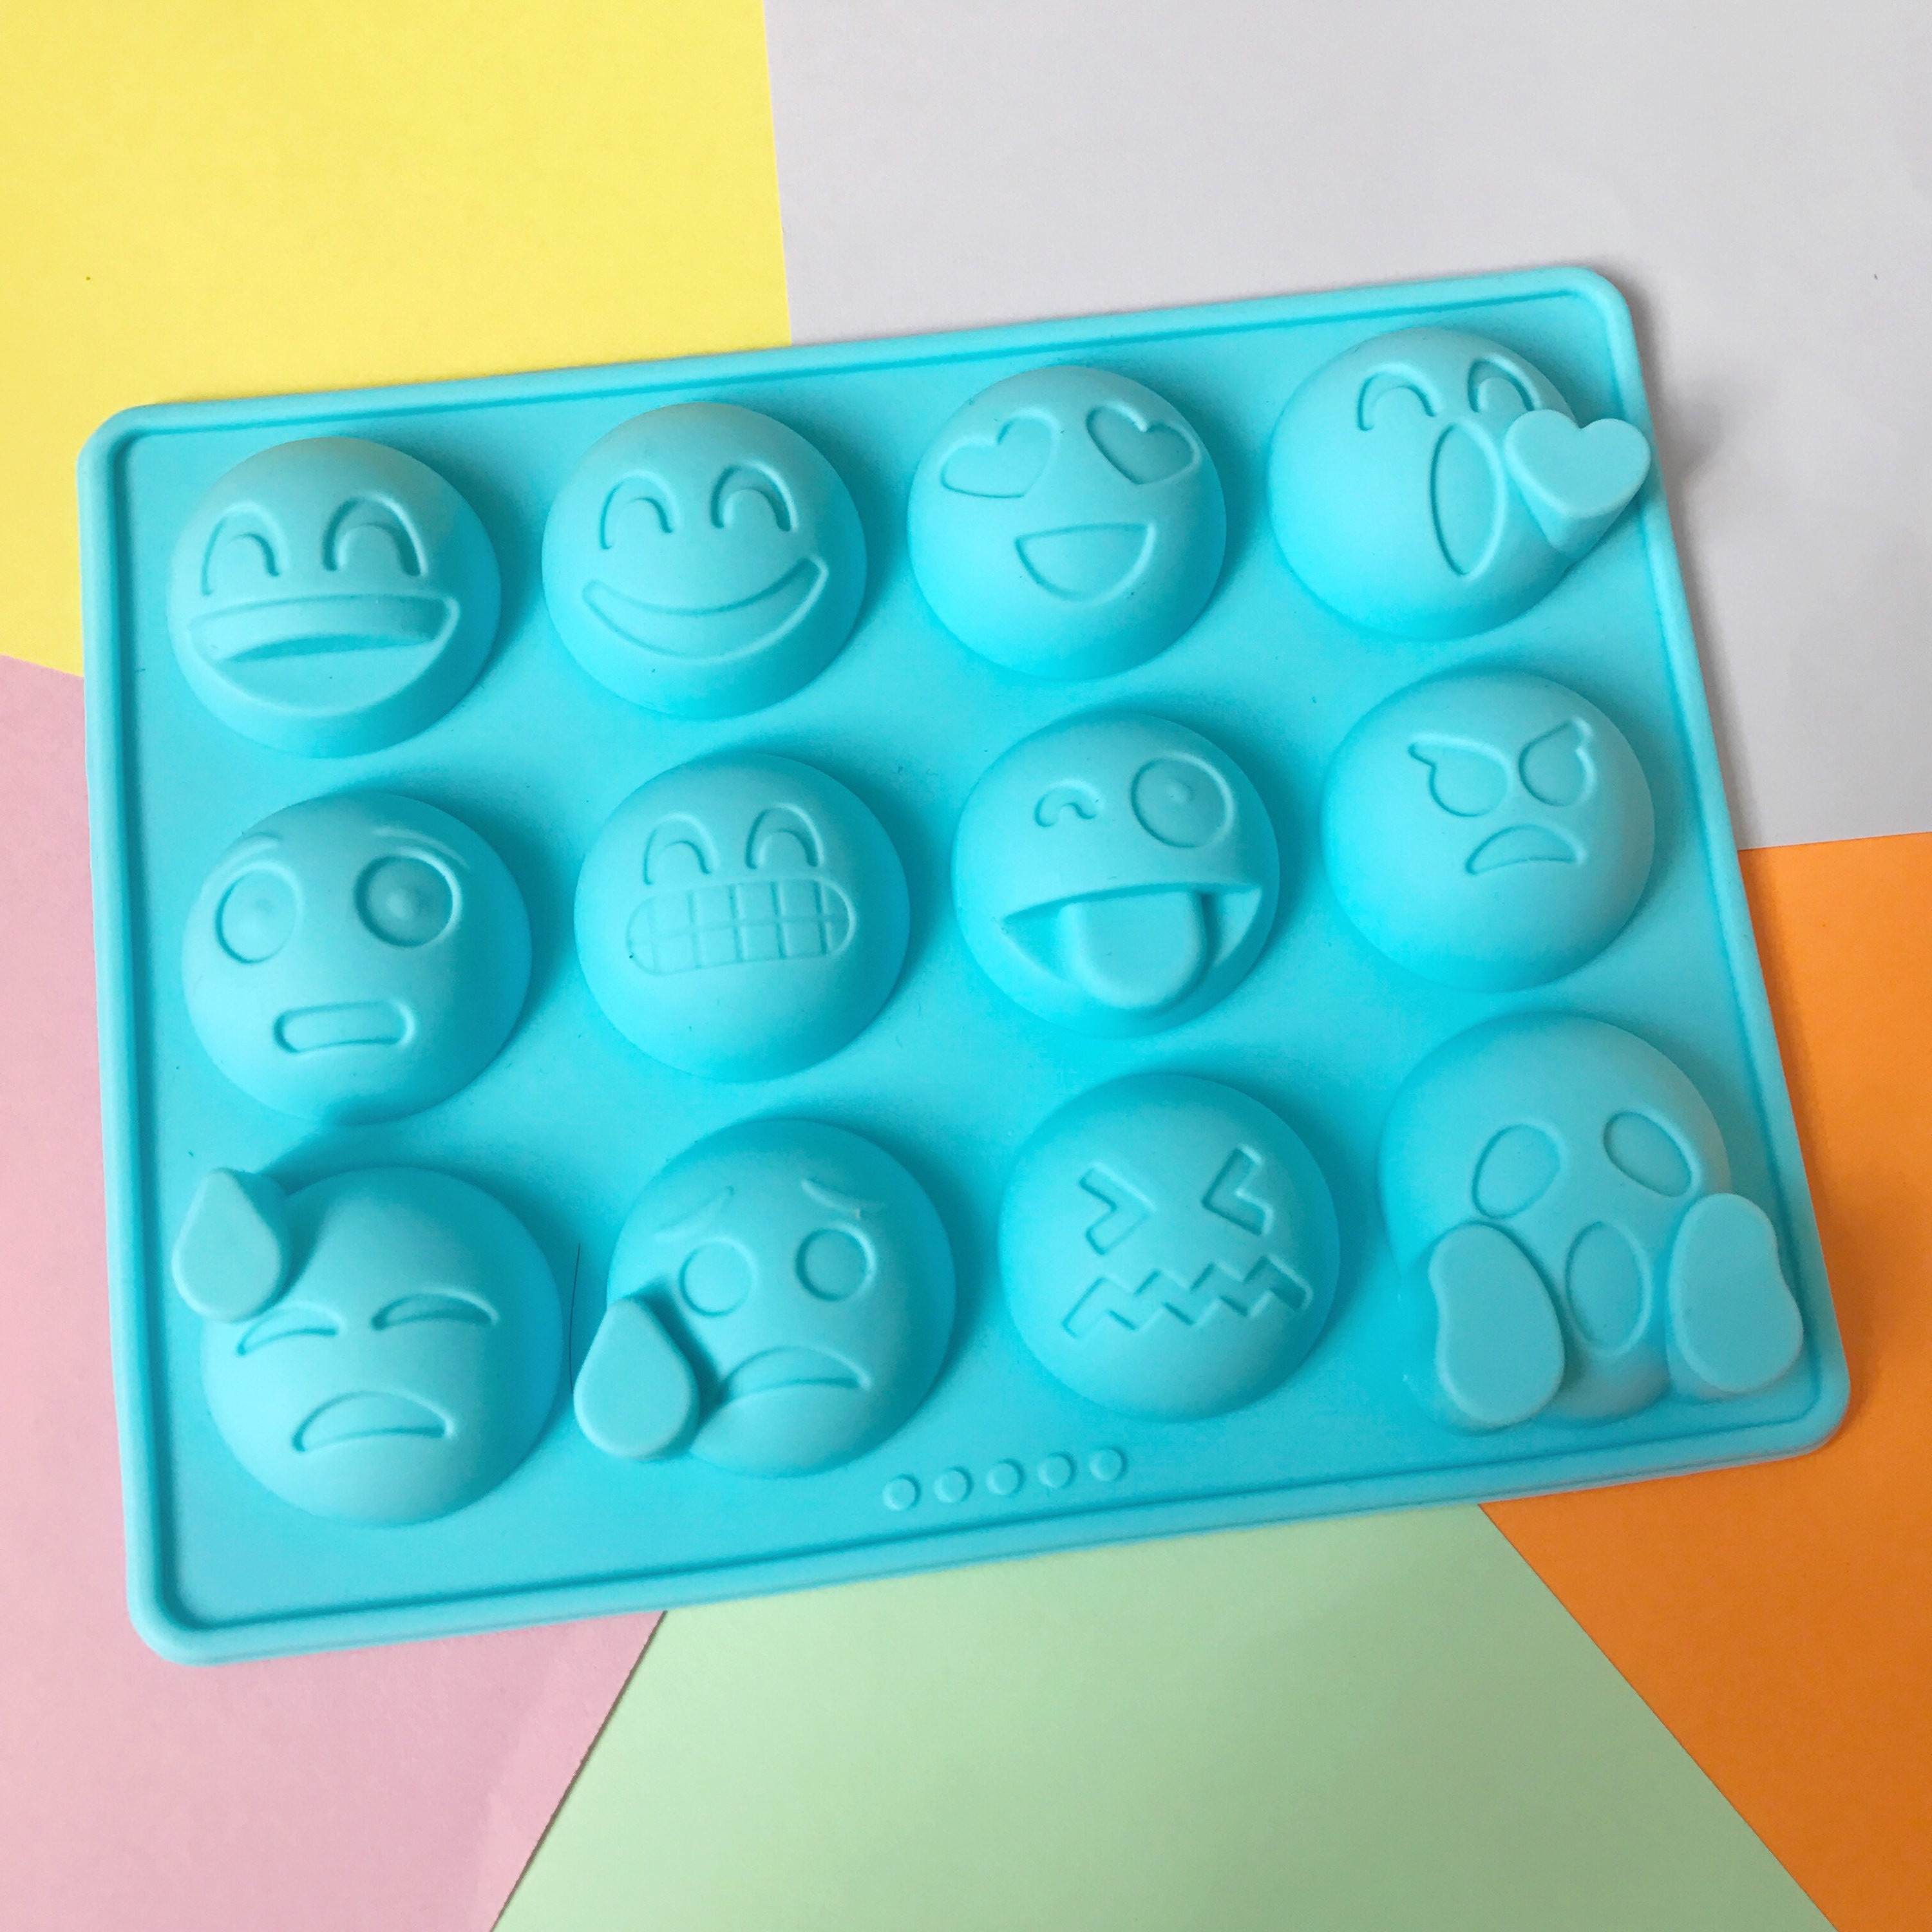 KITCHENATICS Nonstick BPA-free Small Silicone Molds for Candy, Emoji Molds  Silicone for Mini Candy Molds, Jello, Gummy Candy, Silicone Baking Molds  for Kids Adults, Smiley Face Mold Silicone Set, 4 Pc 